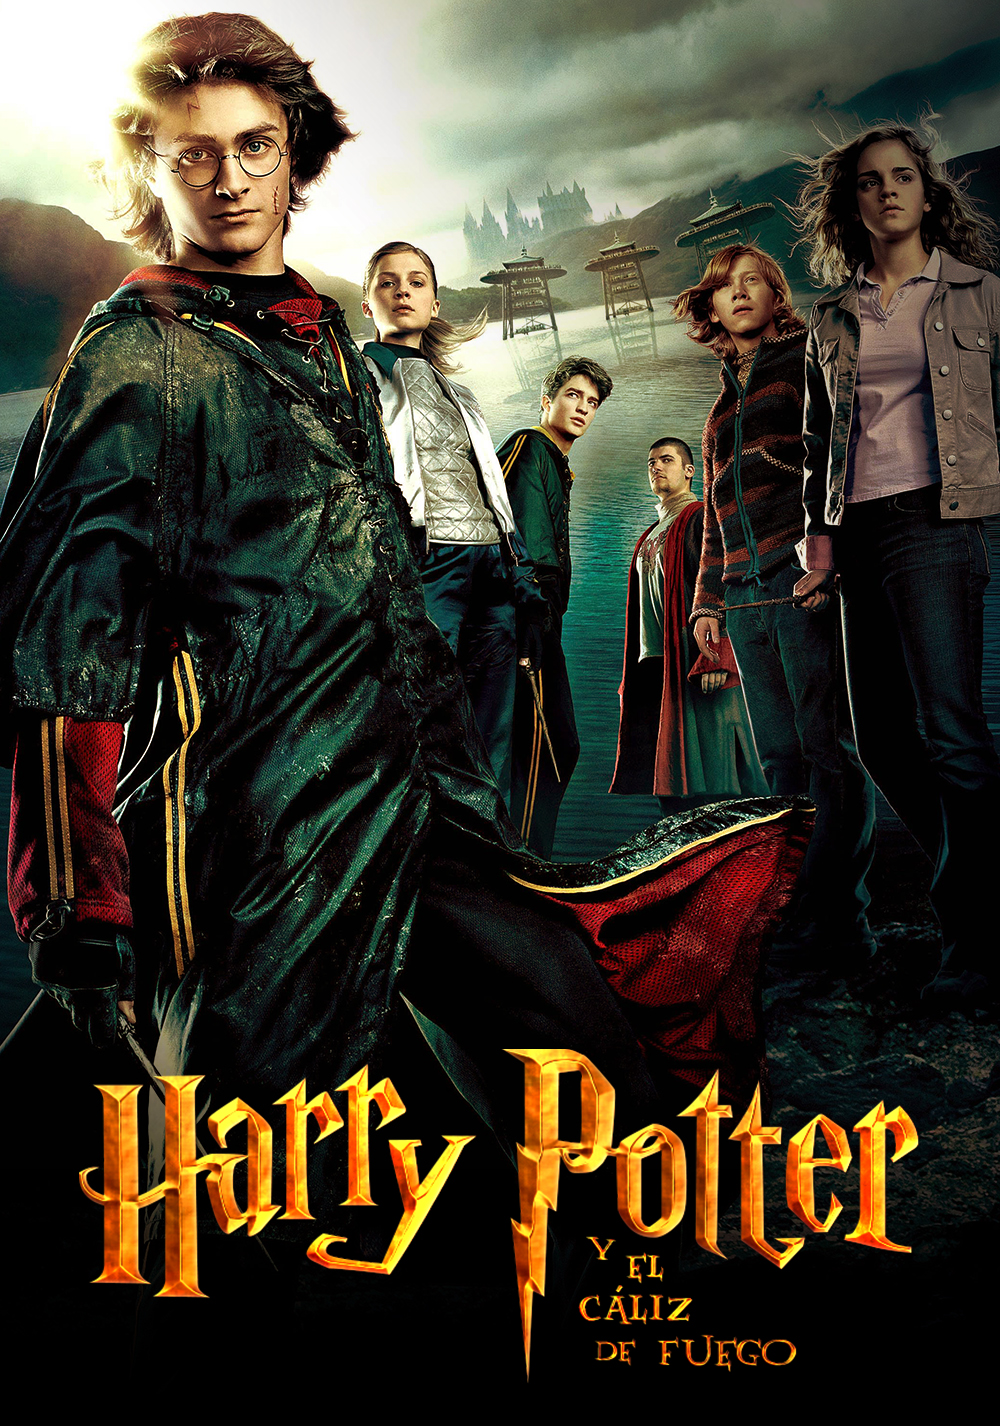 harry potter and the goblet of fire 360p download